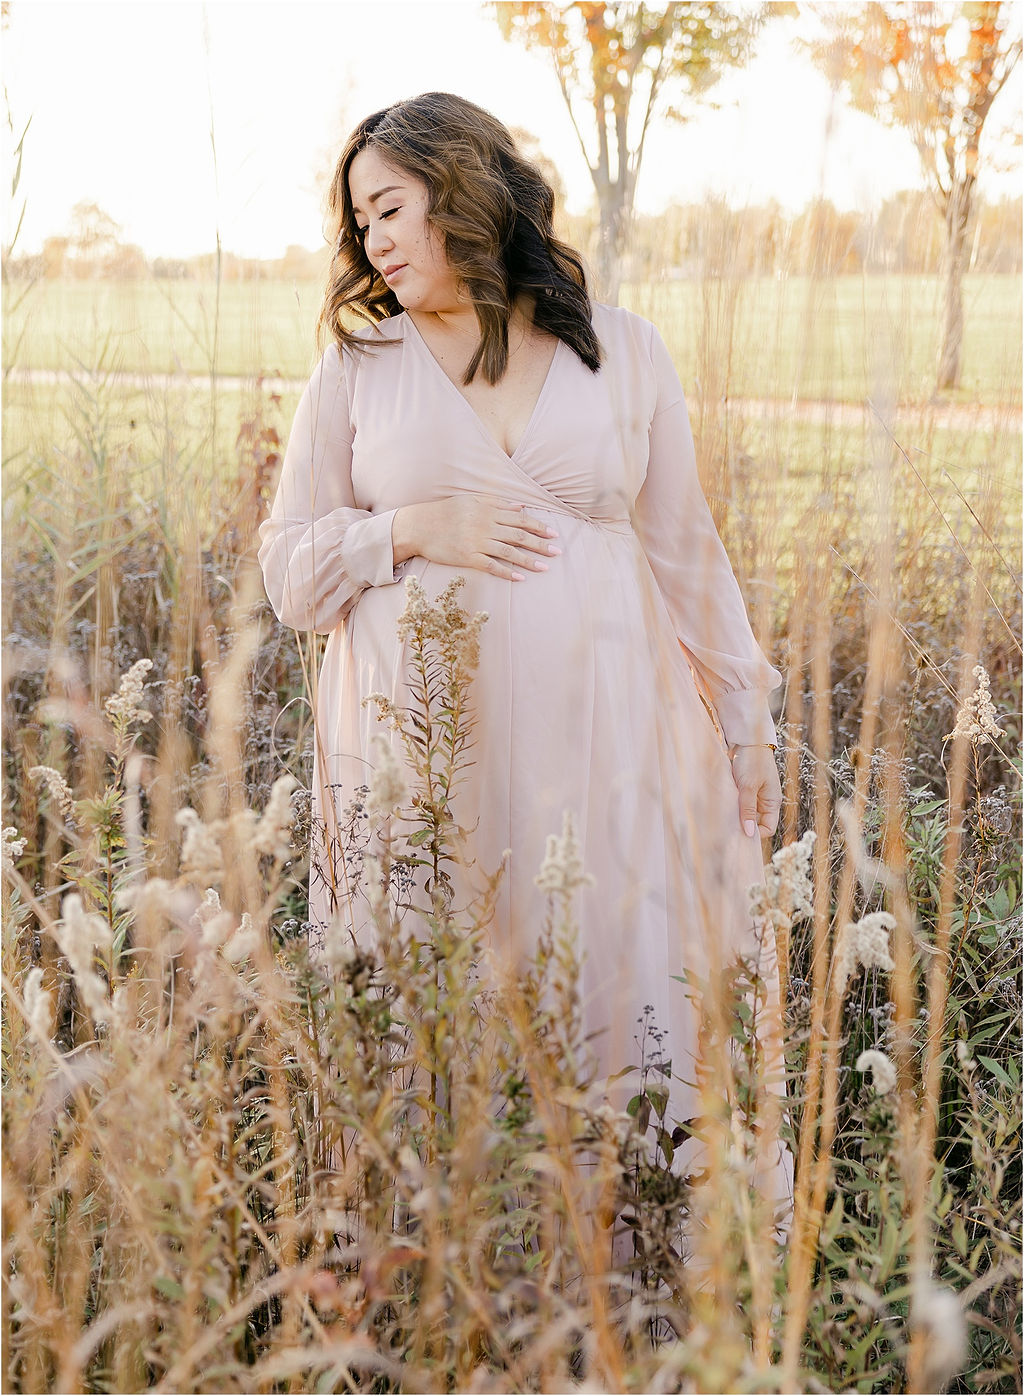 A mother to be rests a hand on her bump while walking through a field of tall wildflowers thanks to ivf indianapolis